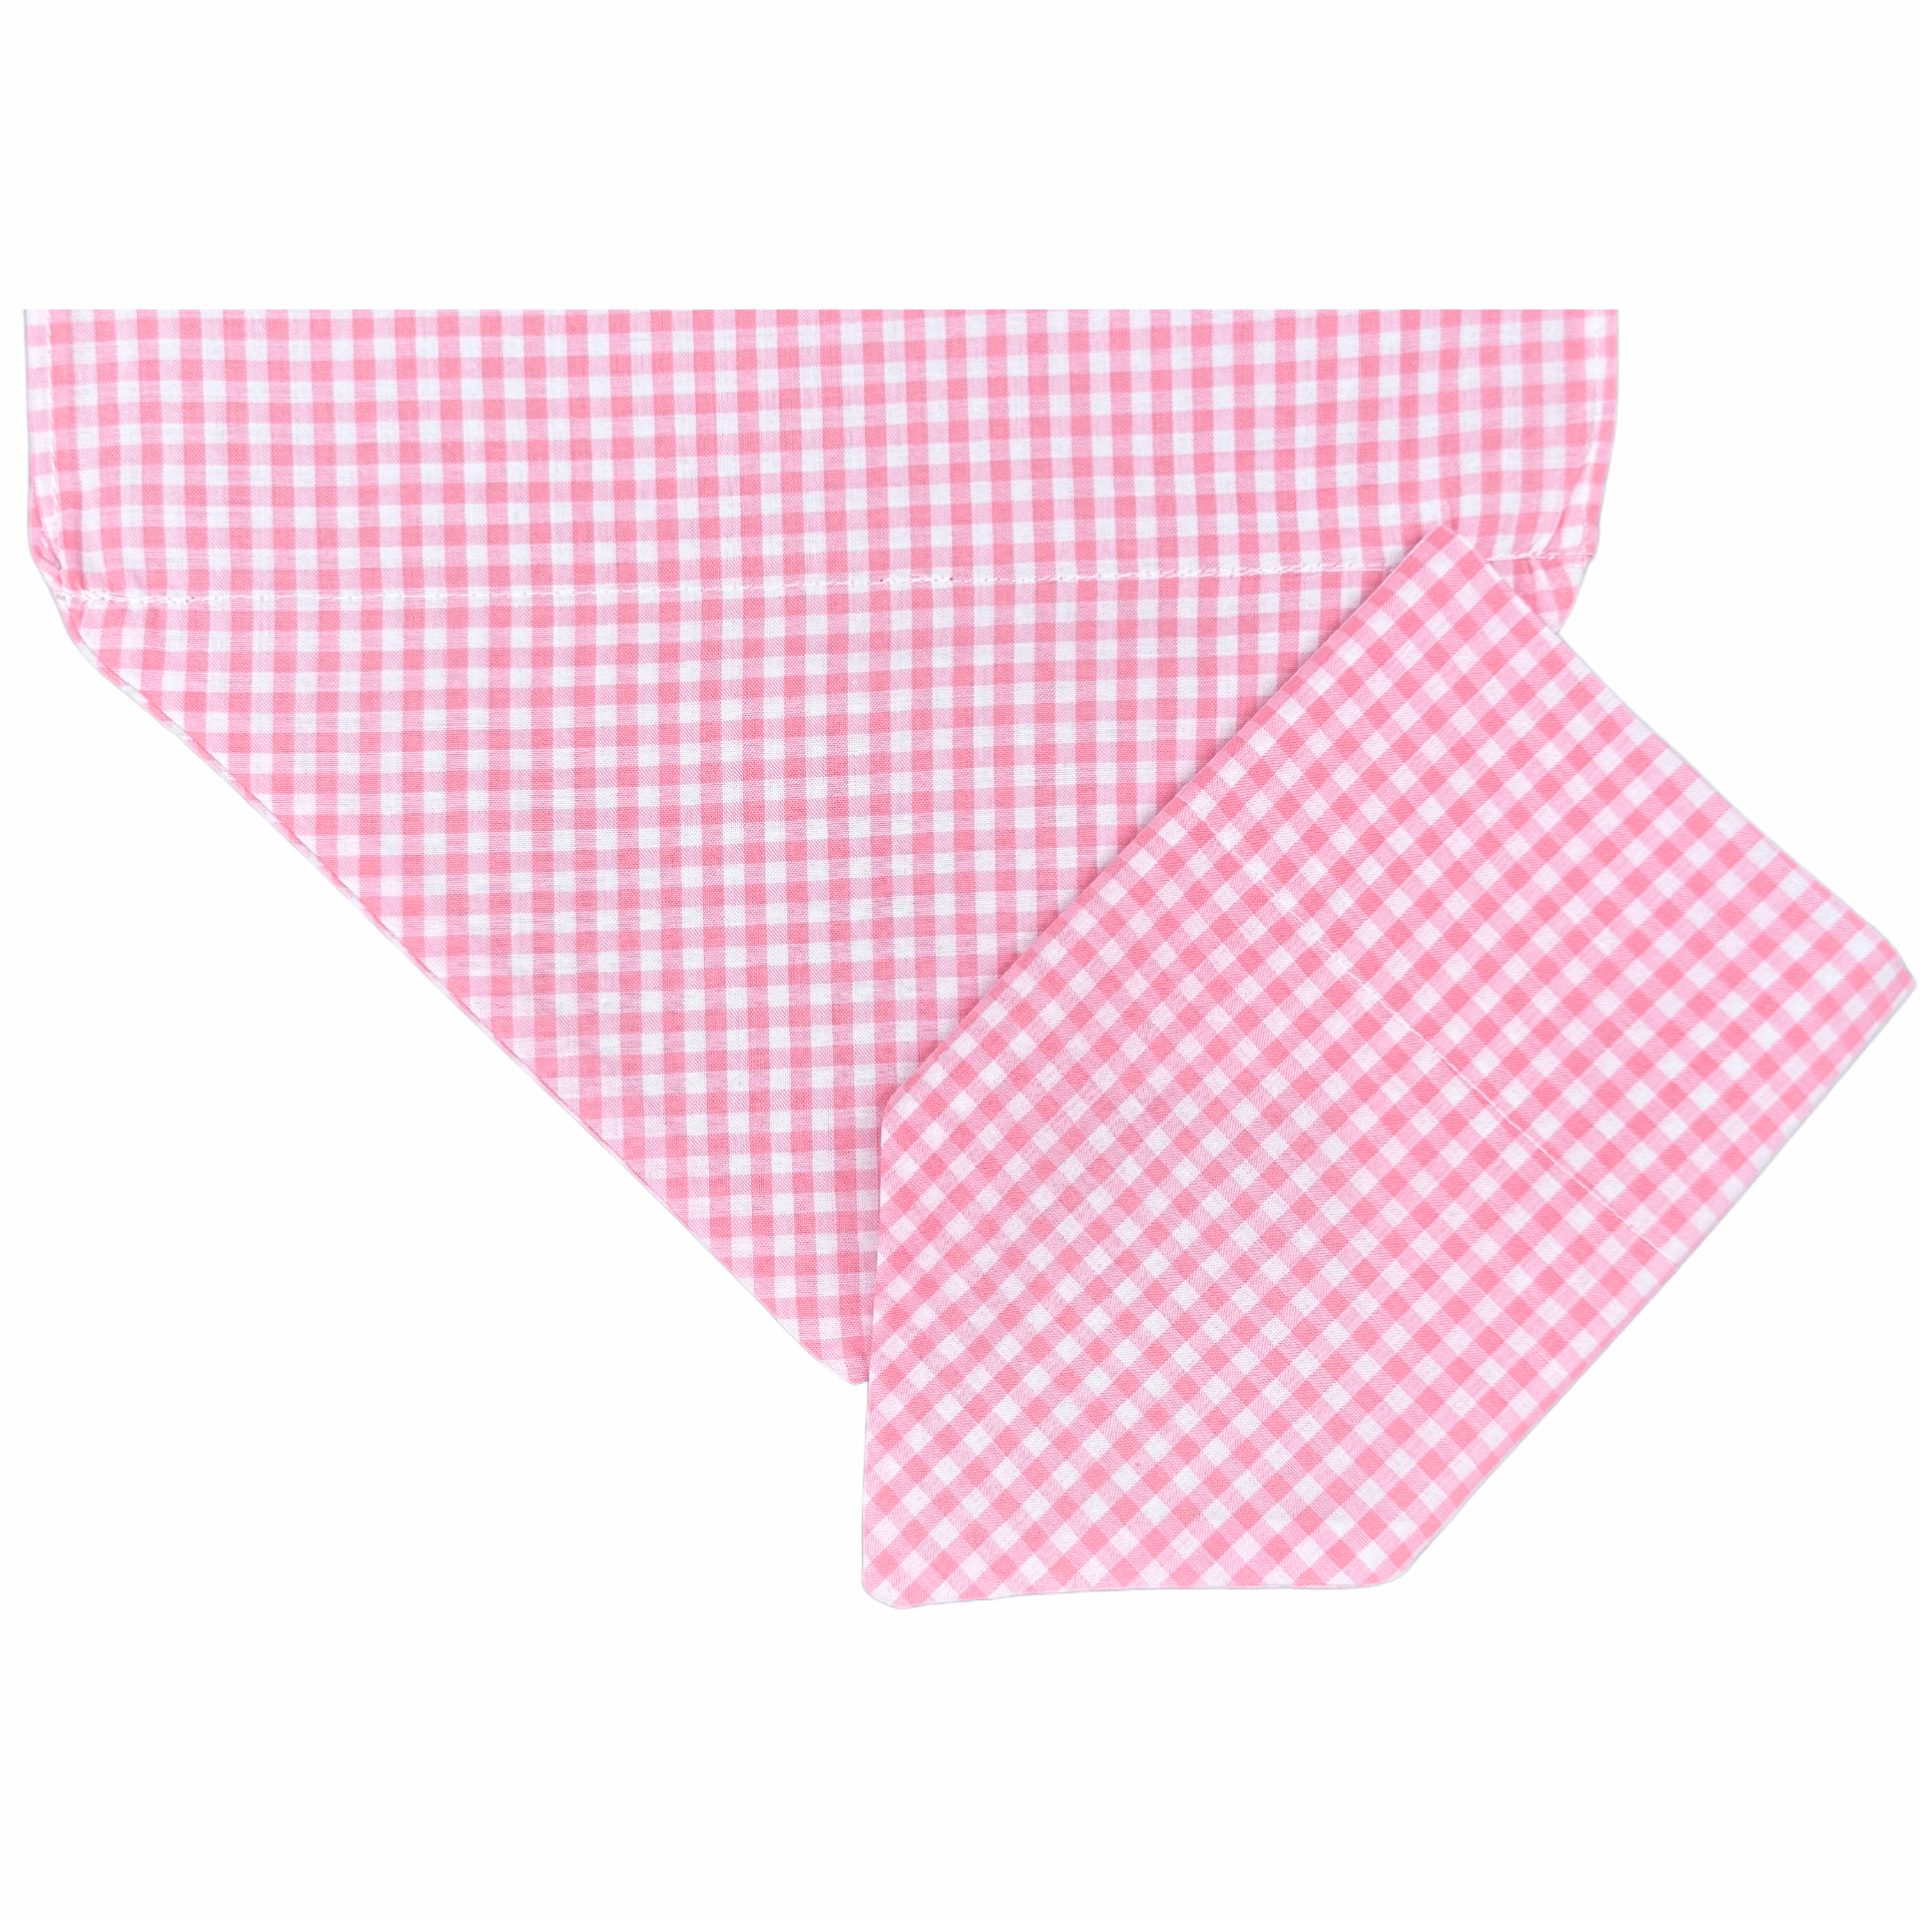 Dog reversible bandana over the collar, let's pawty, handmade, pink gingham